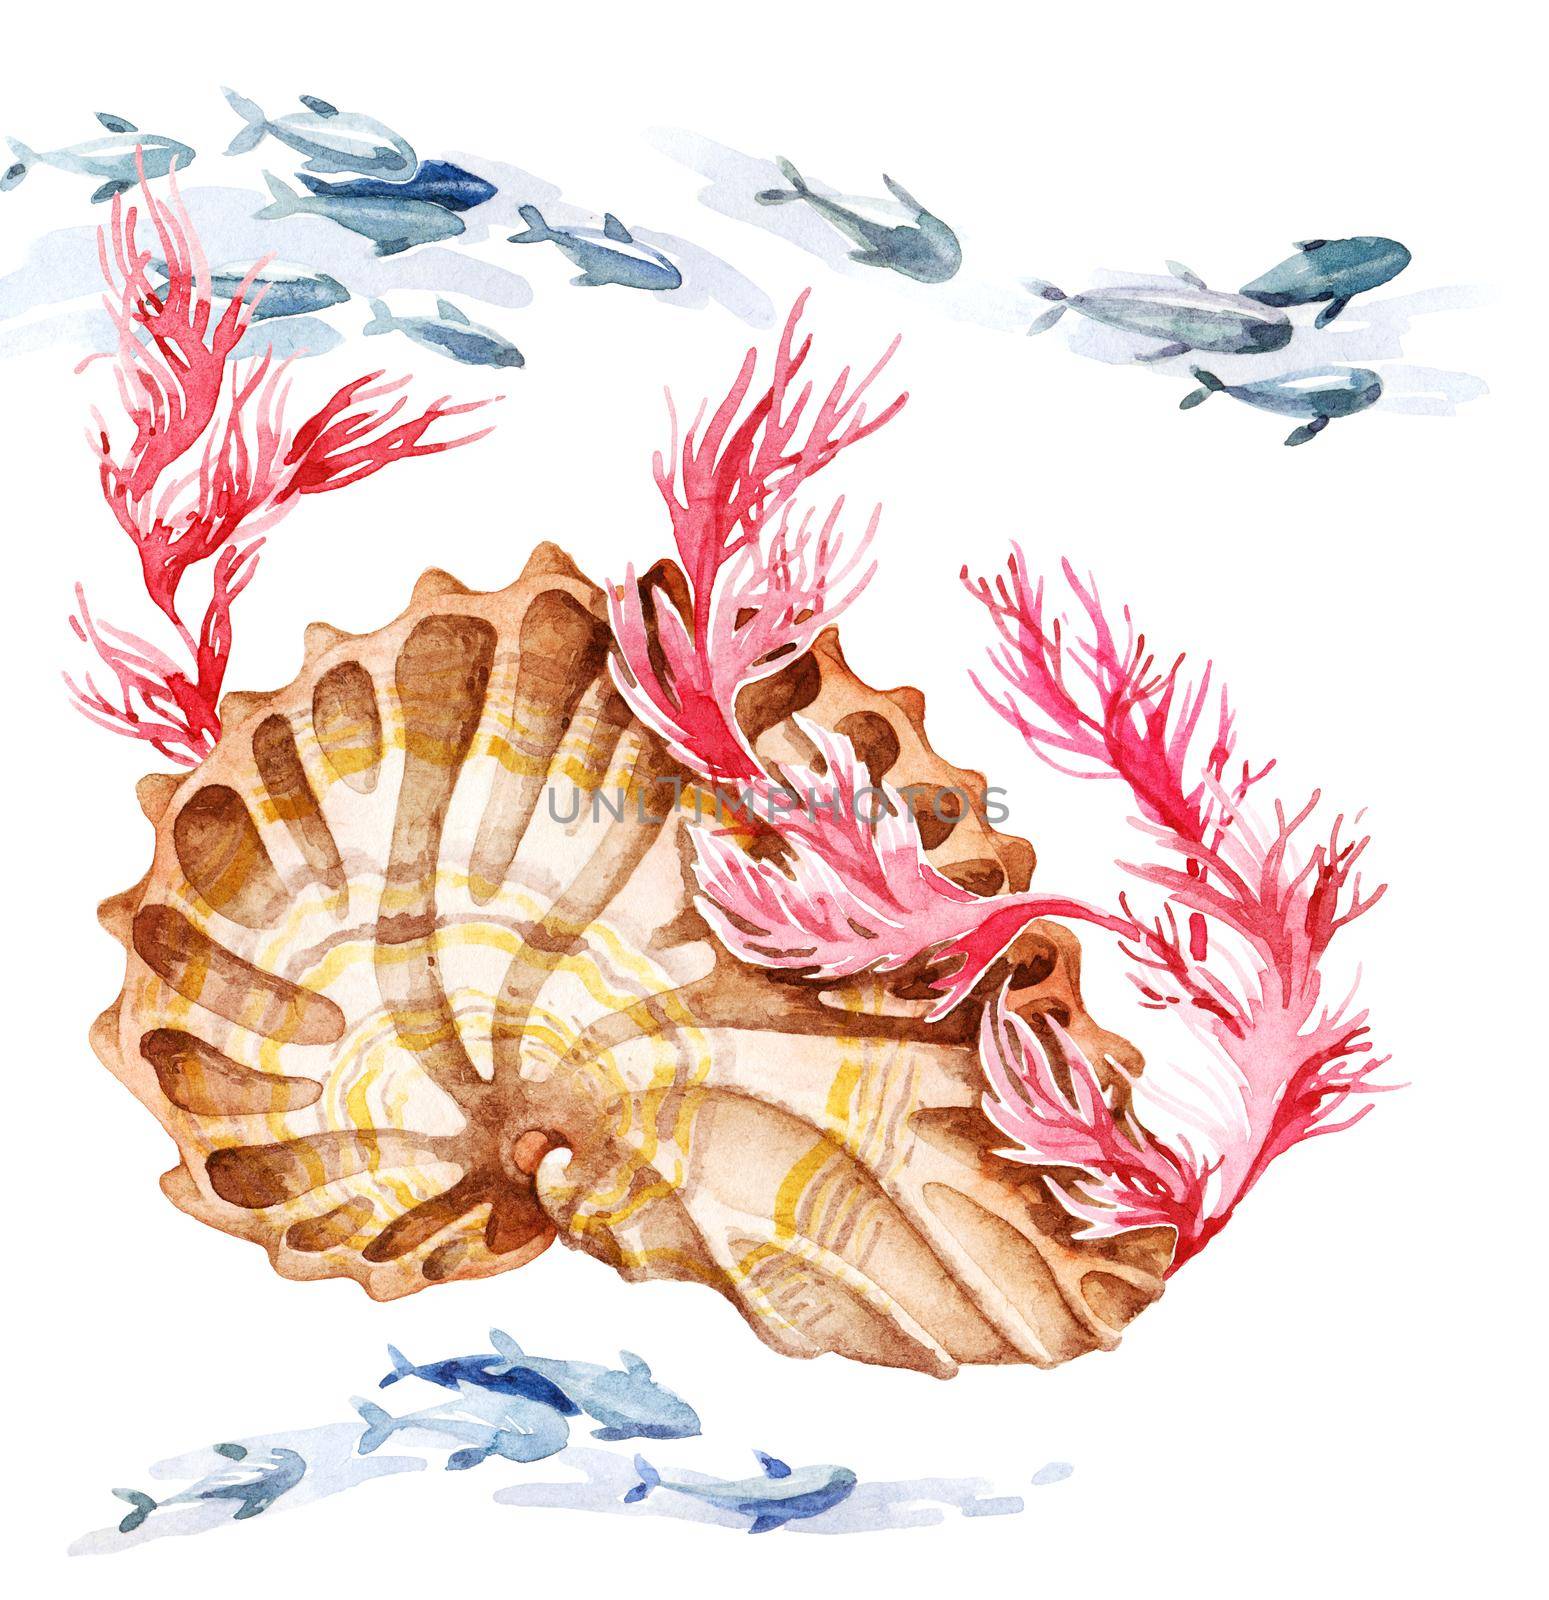 Watercolor illustration of shell with marine seaweed and floating fishes